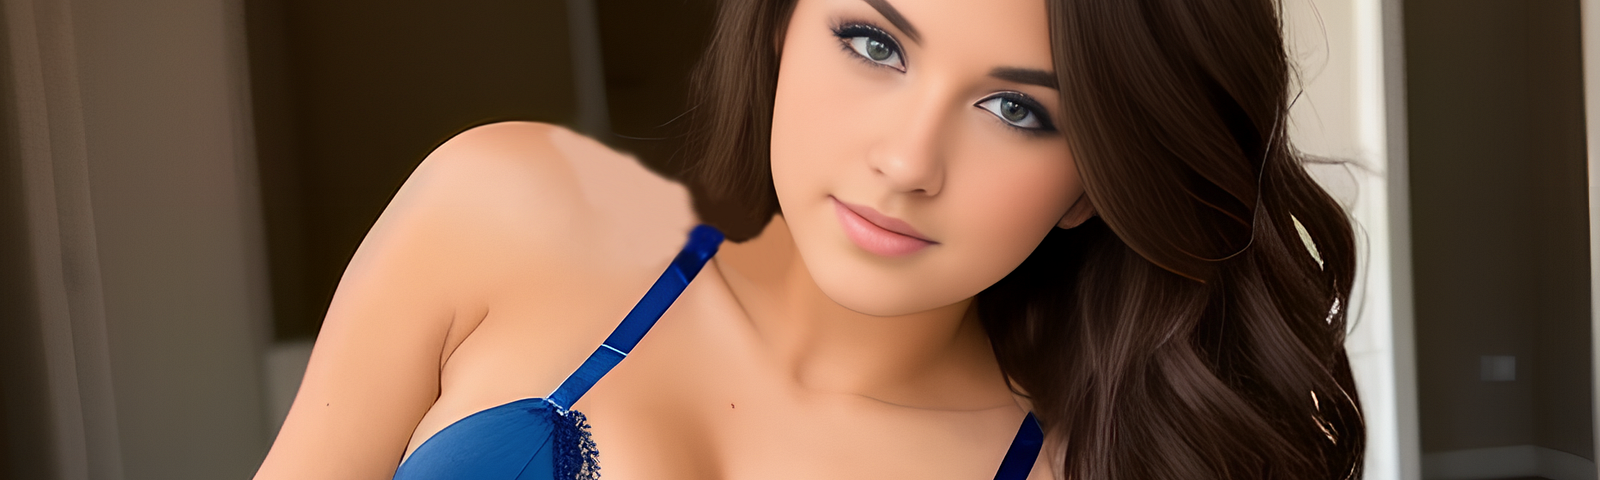 A young woman with brunette hair and blue eyes gazes at the camera, wearing blue lingerie.